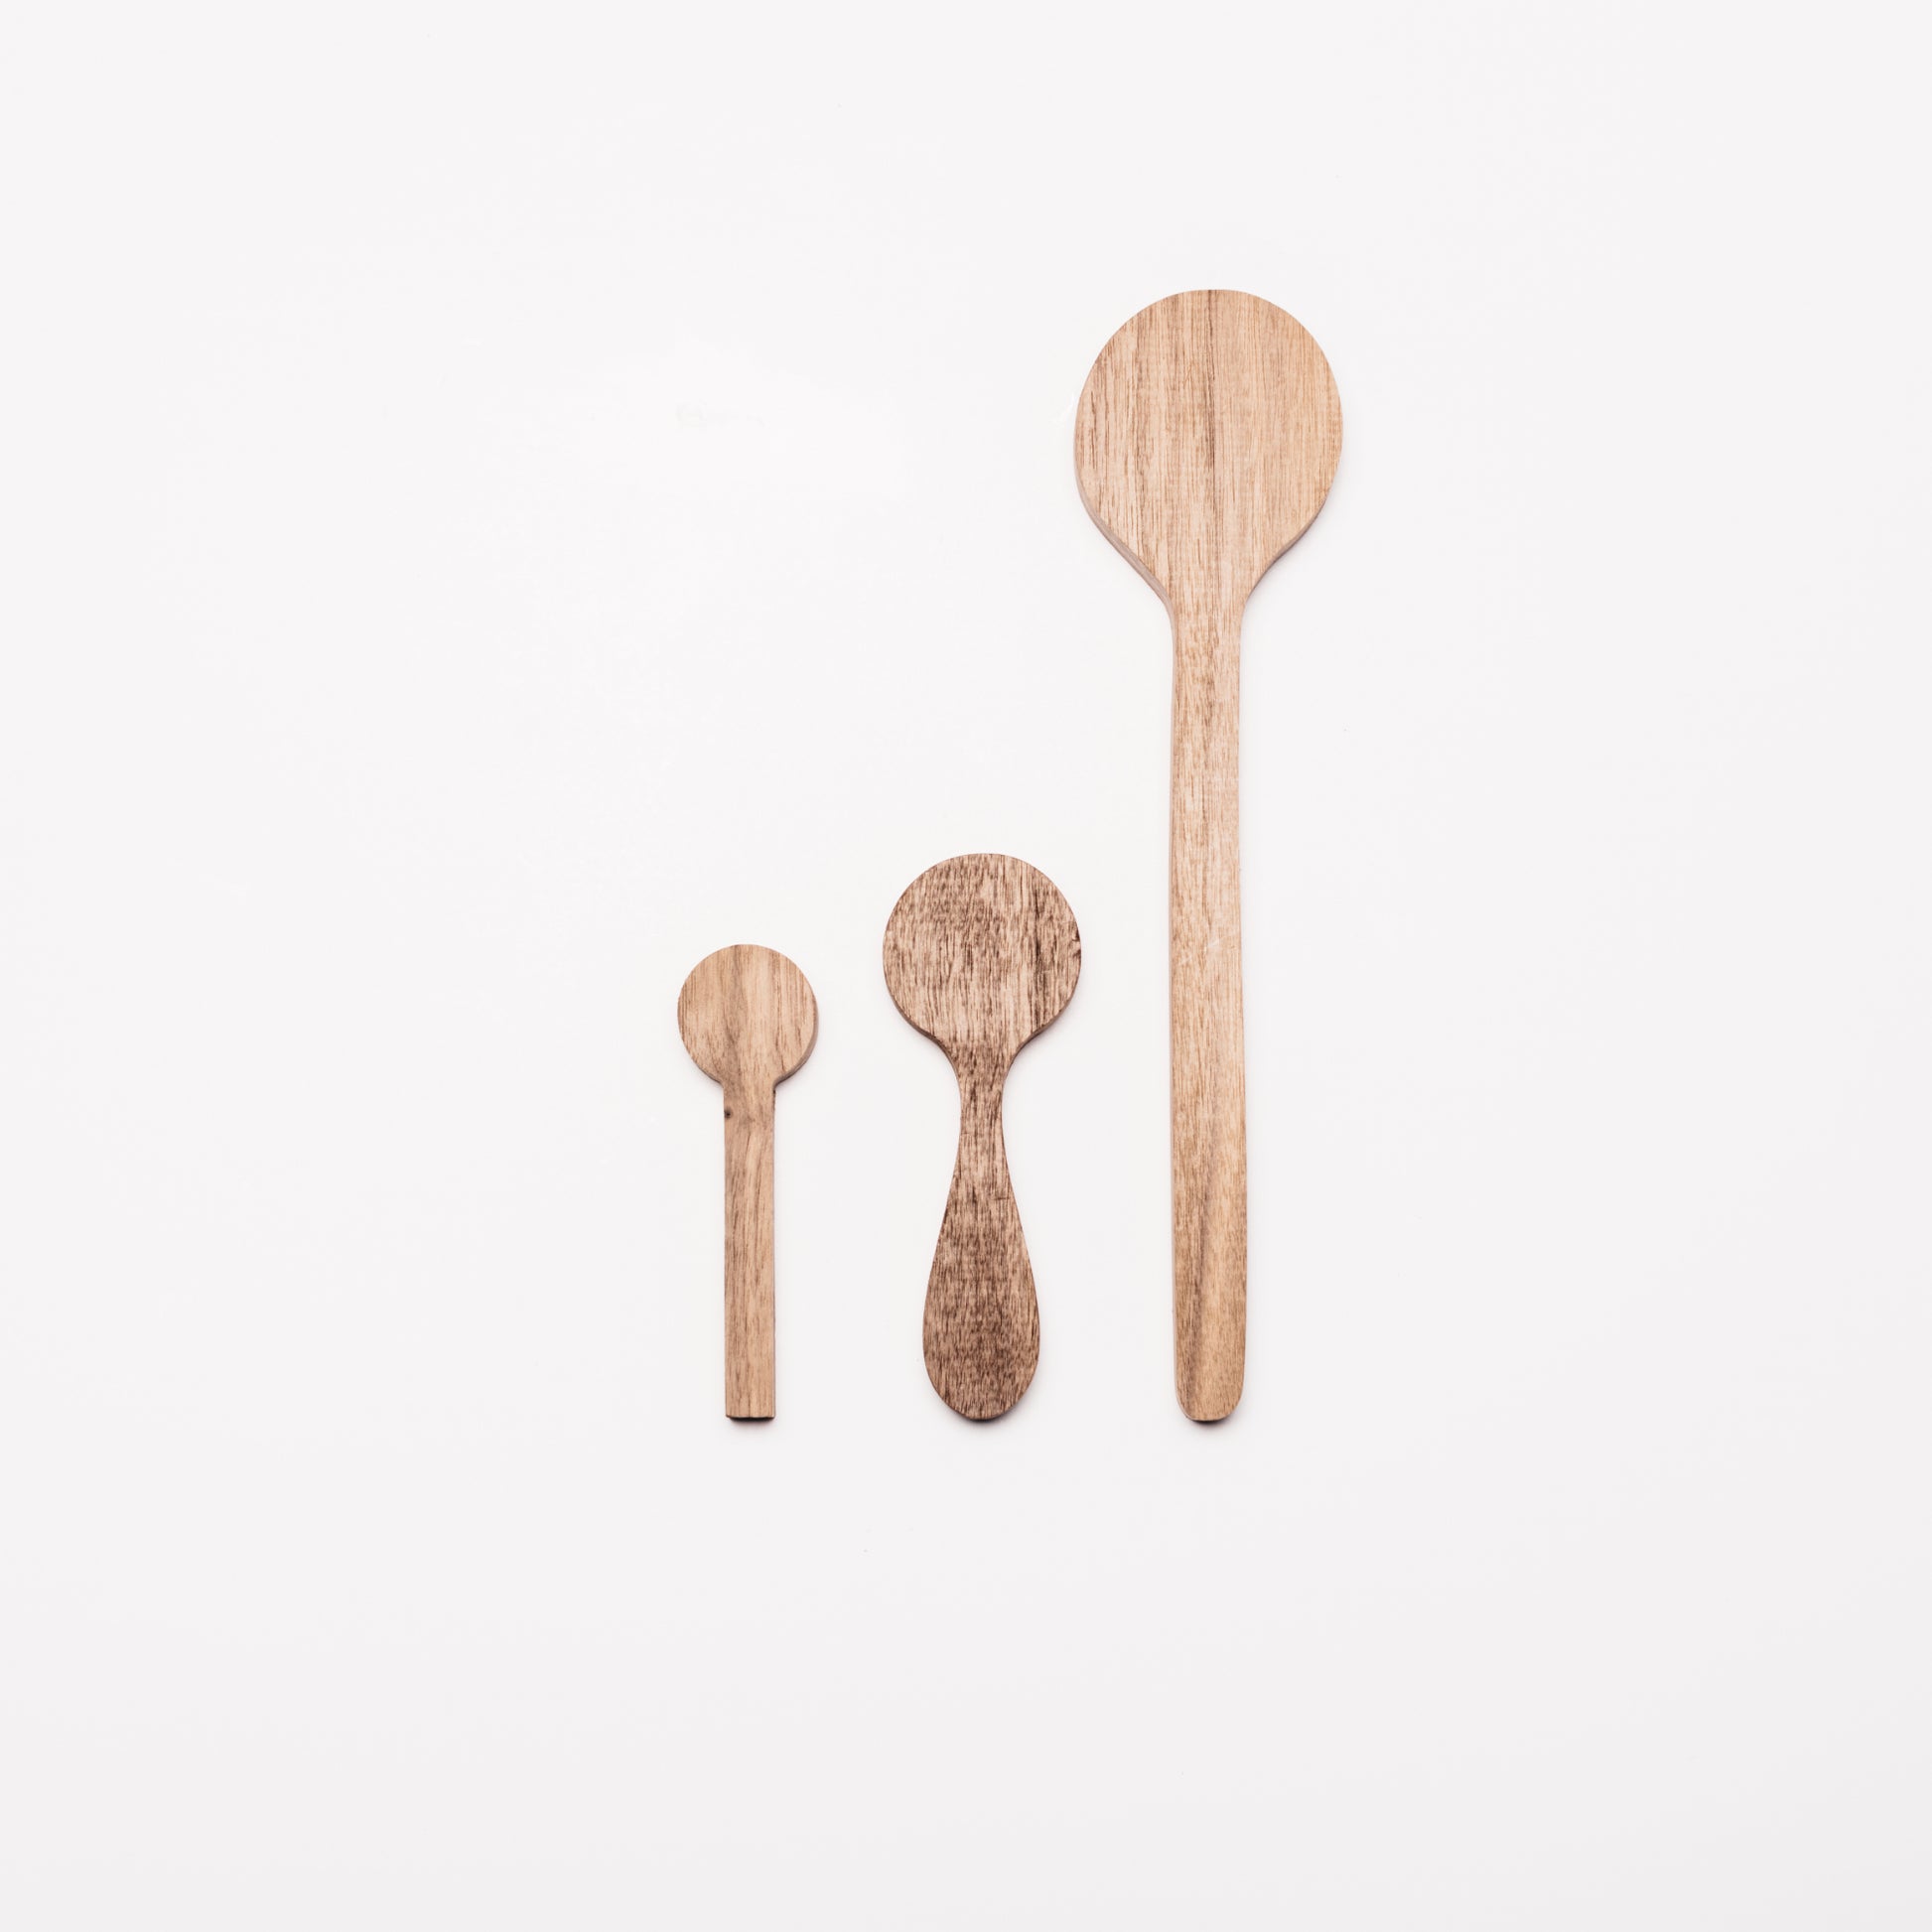 Regular, coffee, and cooking spoons in Walnut wood. By Melanie Abrantes Designs.